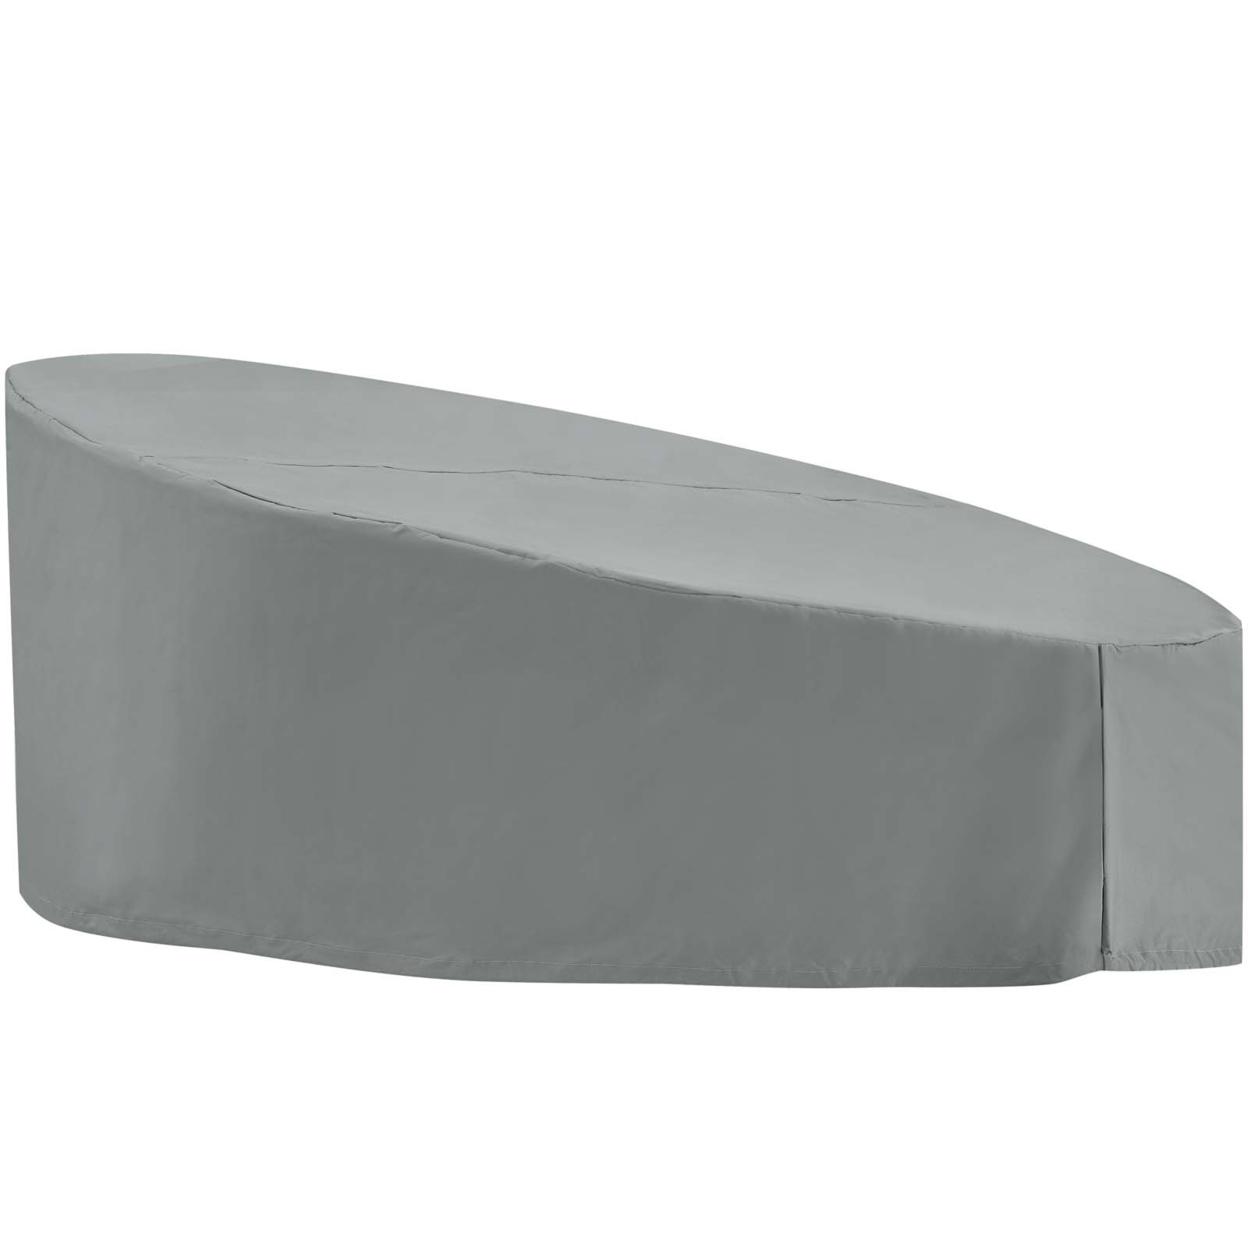 Immerse Taiji, Convene, Sojourn, Summon Daybed Outdoor Patio Furniture Cover